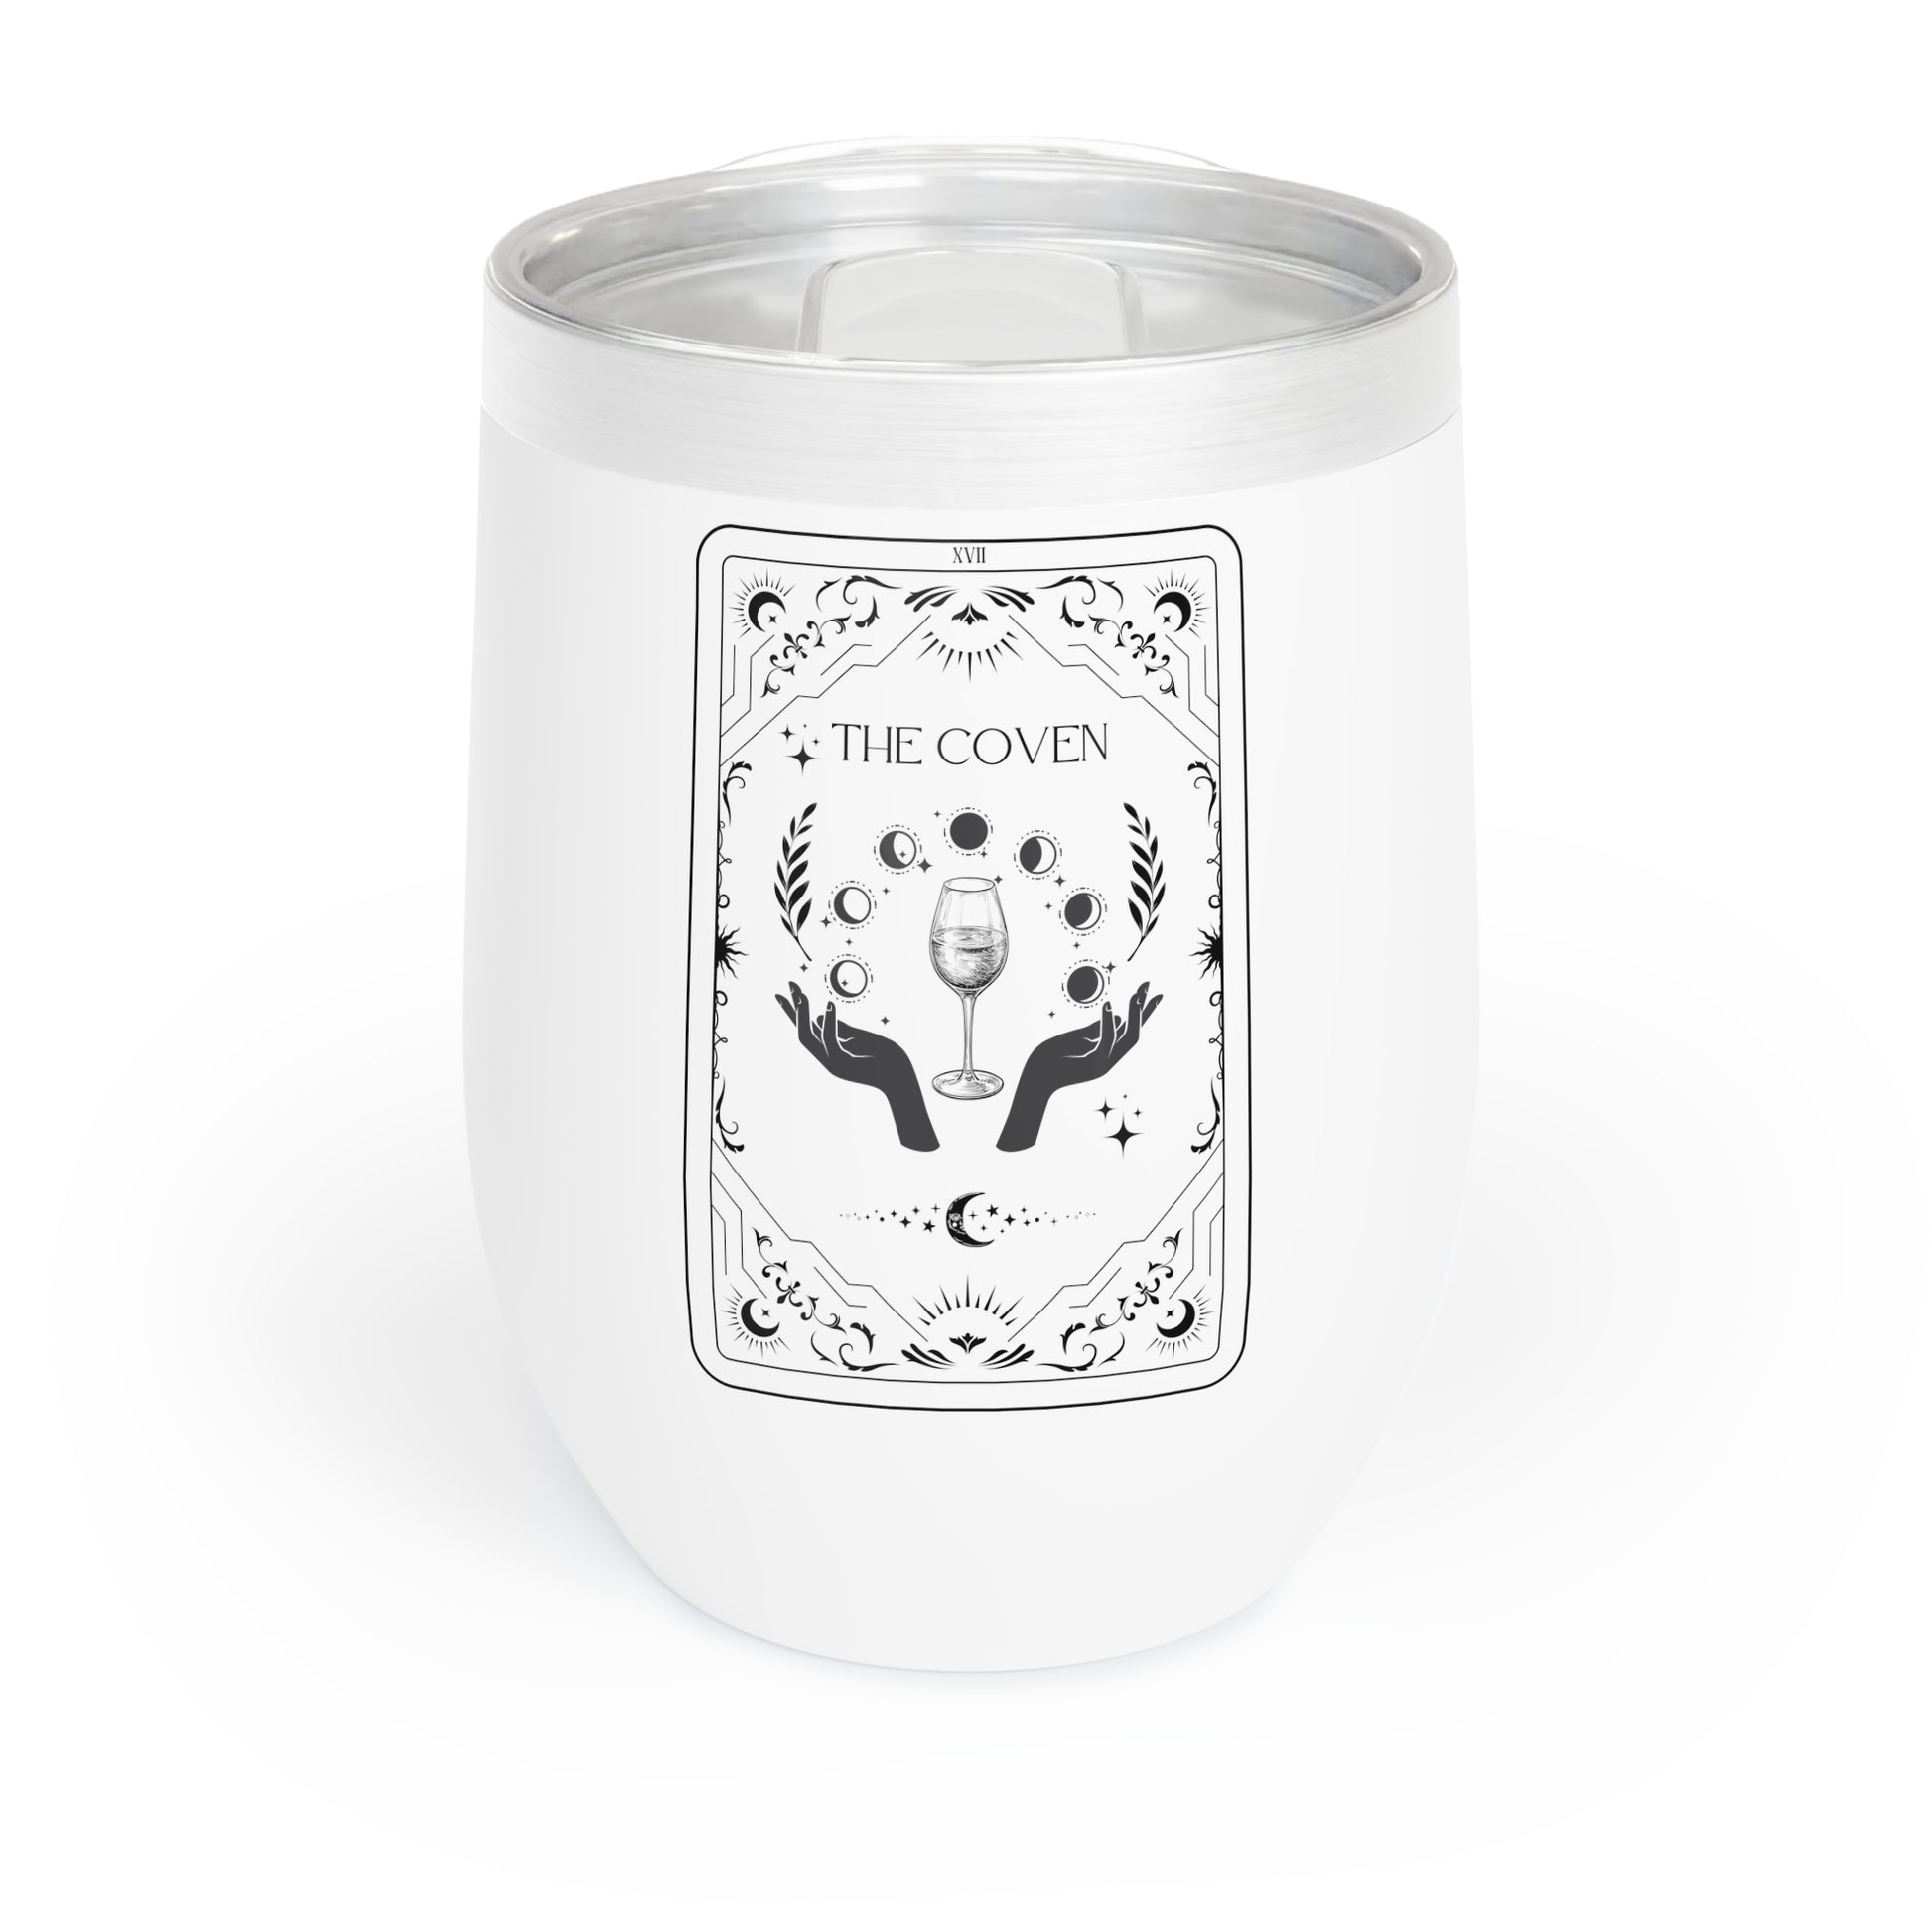 The Coven Chill Wine Tumbler, Bachelorette Chill Wine Tumbler - The Witchy Gypsy